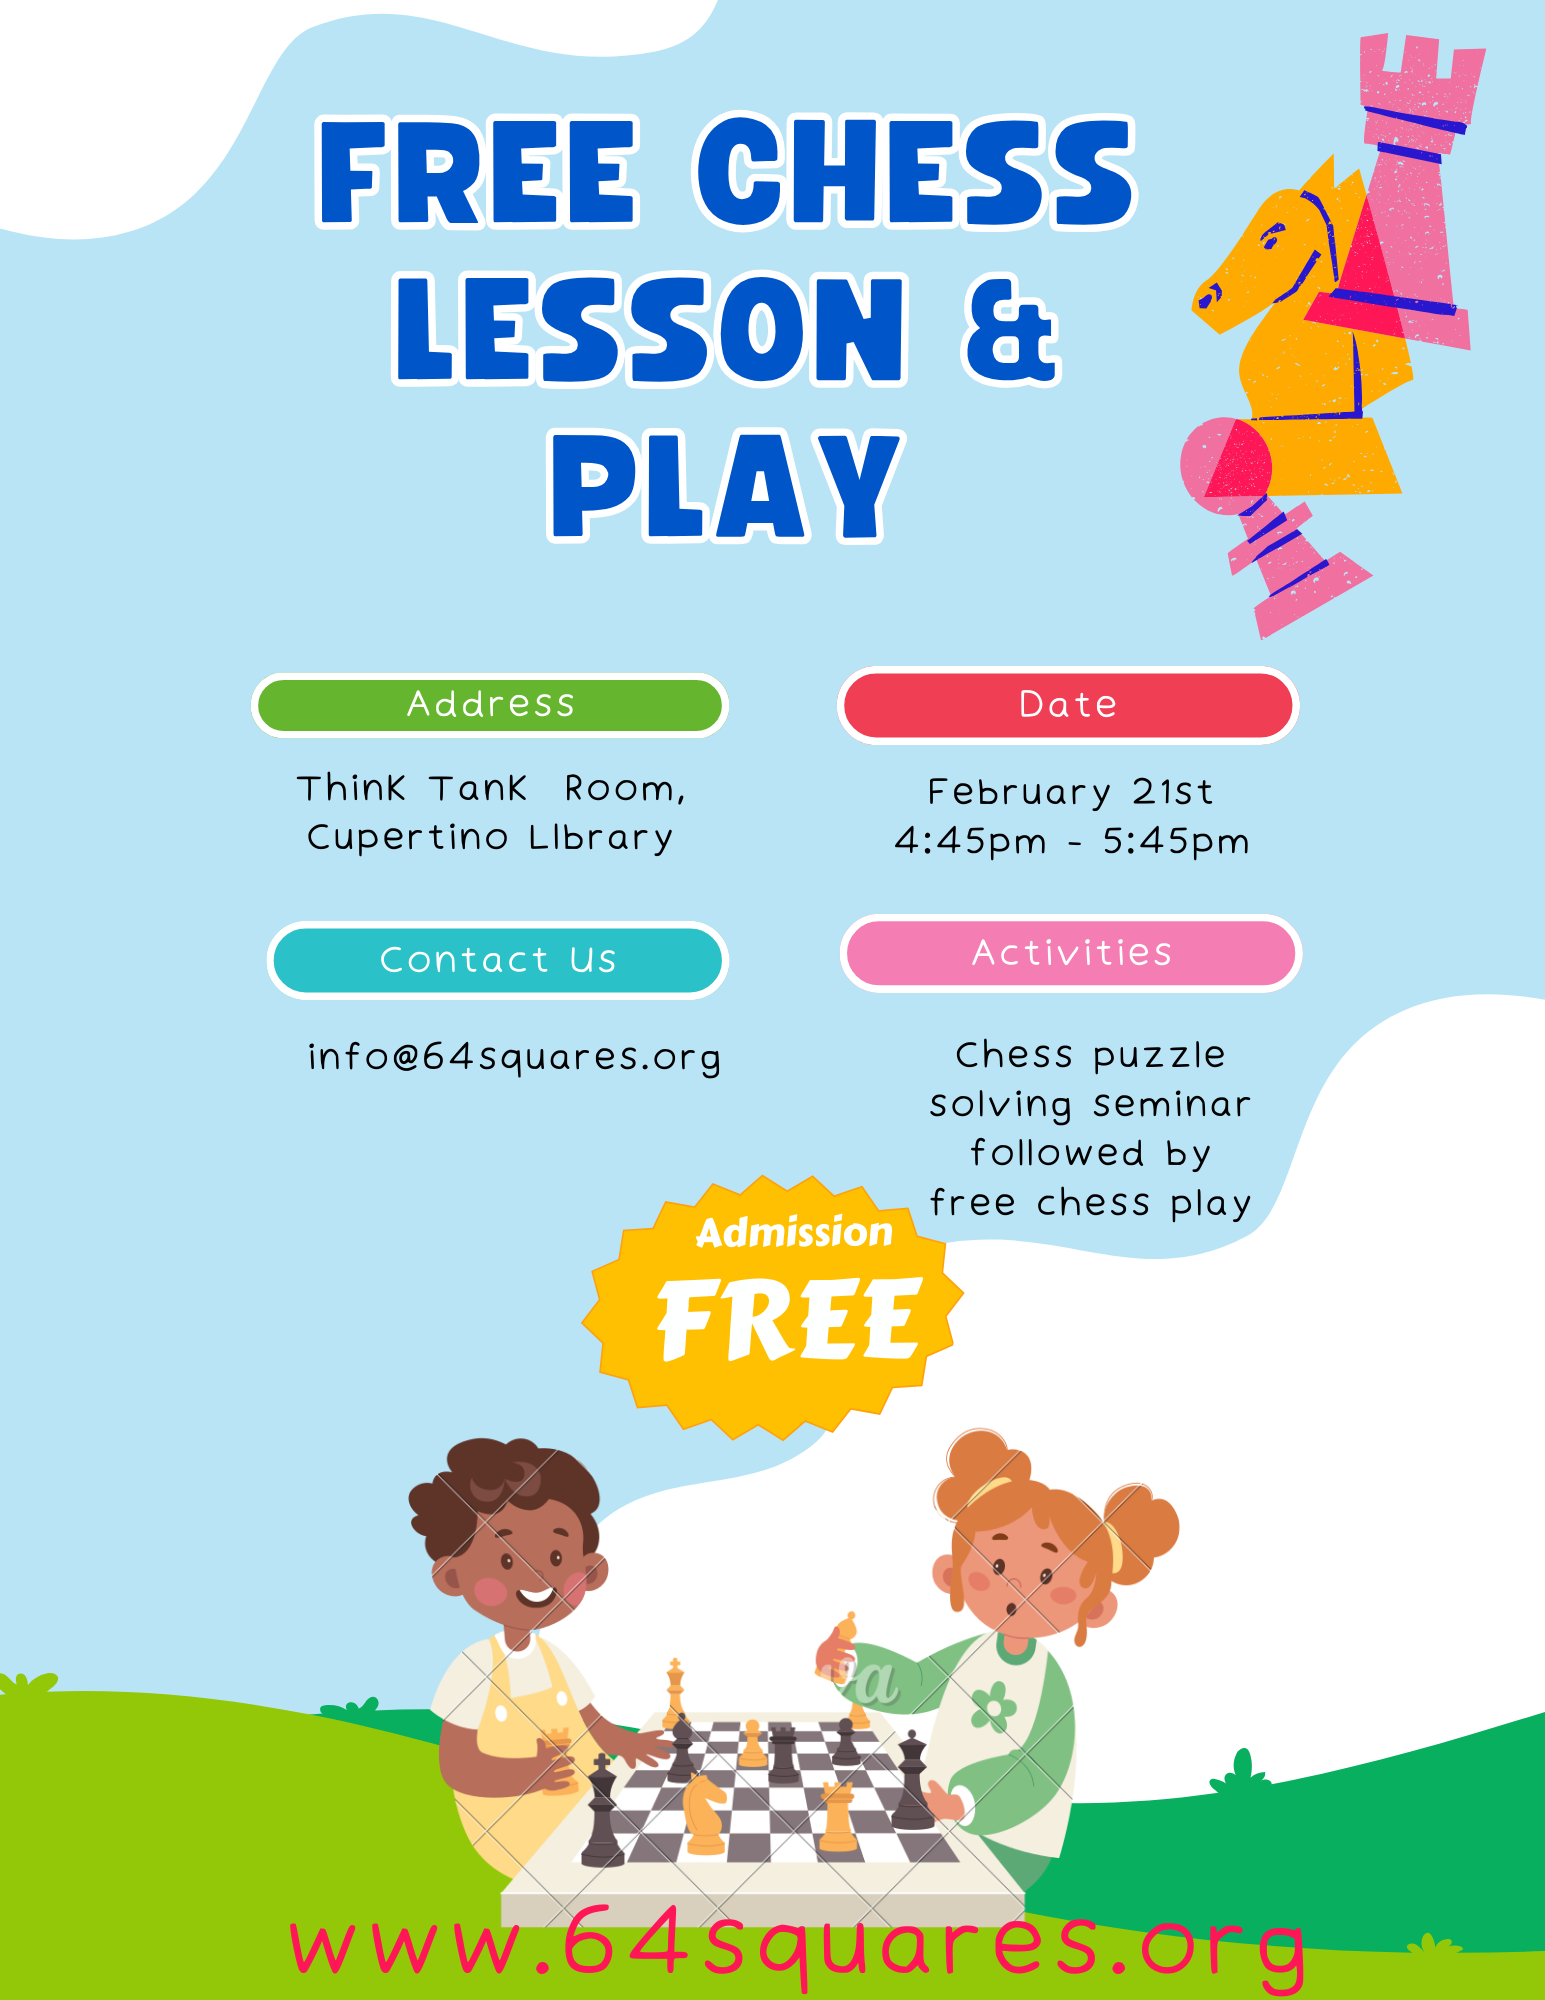 [PAST EVENT] Chess Lesson and Free Play